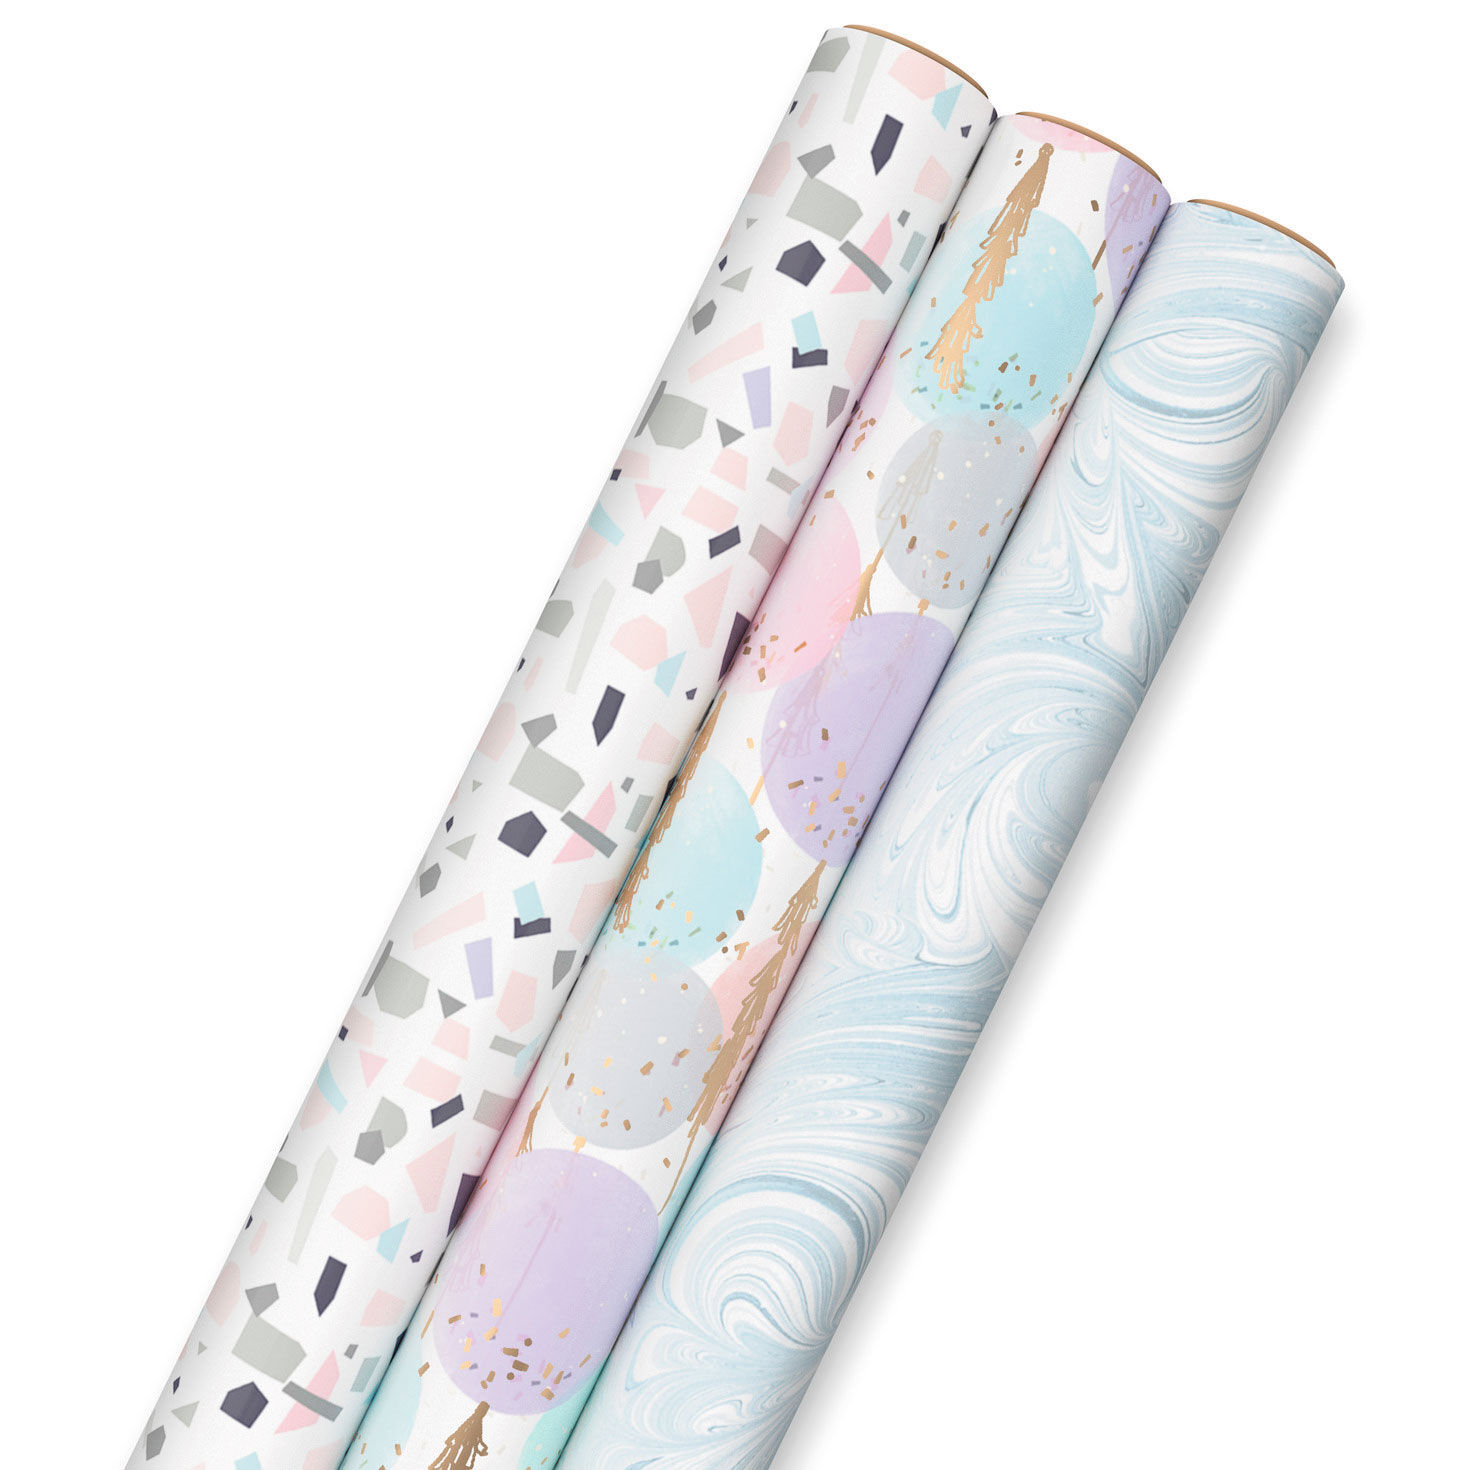 Wrapping Paper Gift Wrap Papers Spring Bridal Shower Mothers Day